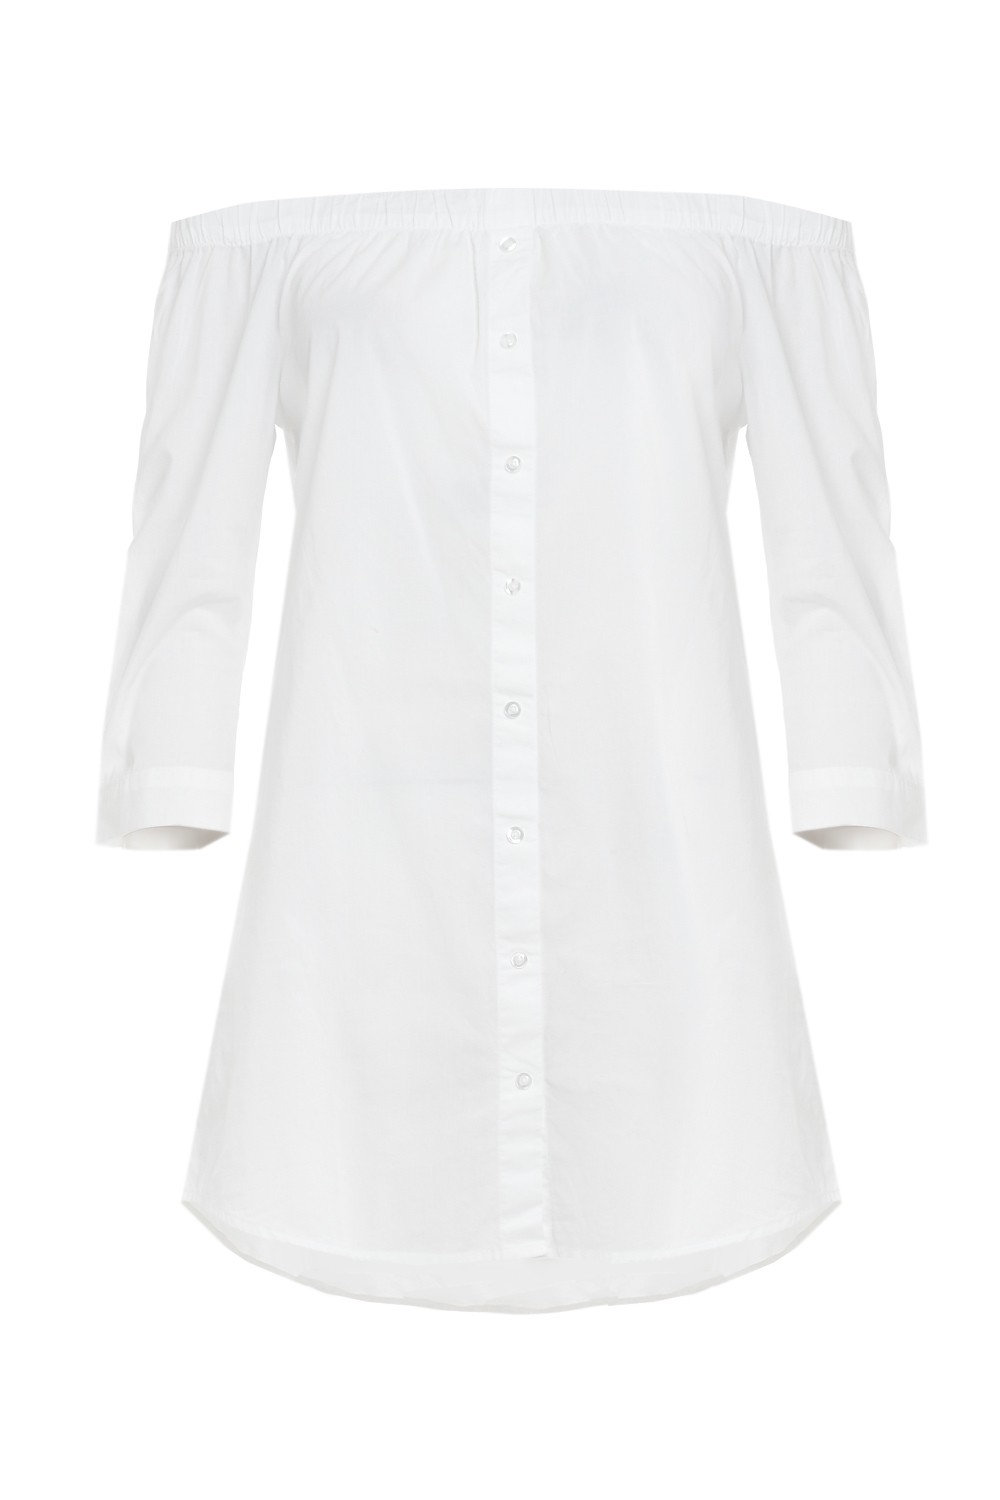 JDY Litzy Tiffany 3/4 Off Shoulder Tunic in White | iCLOTHING